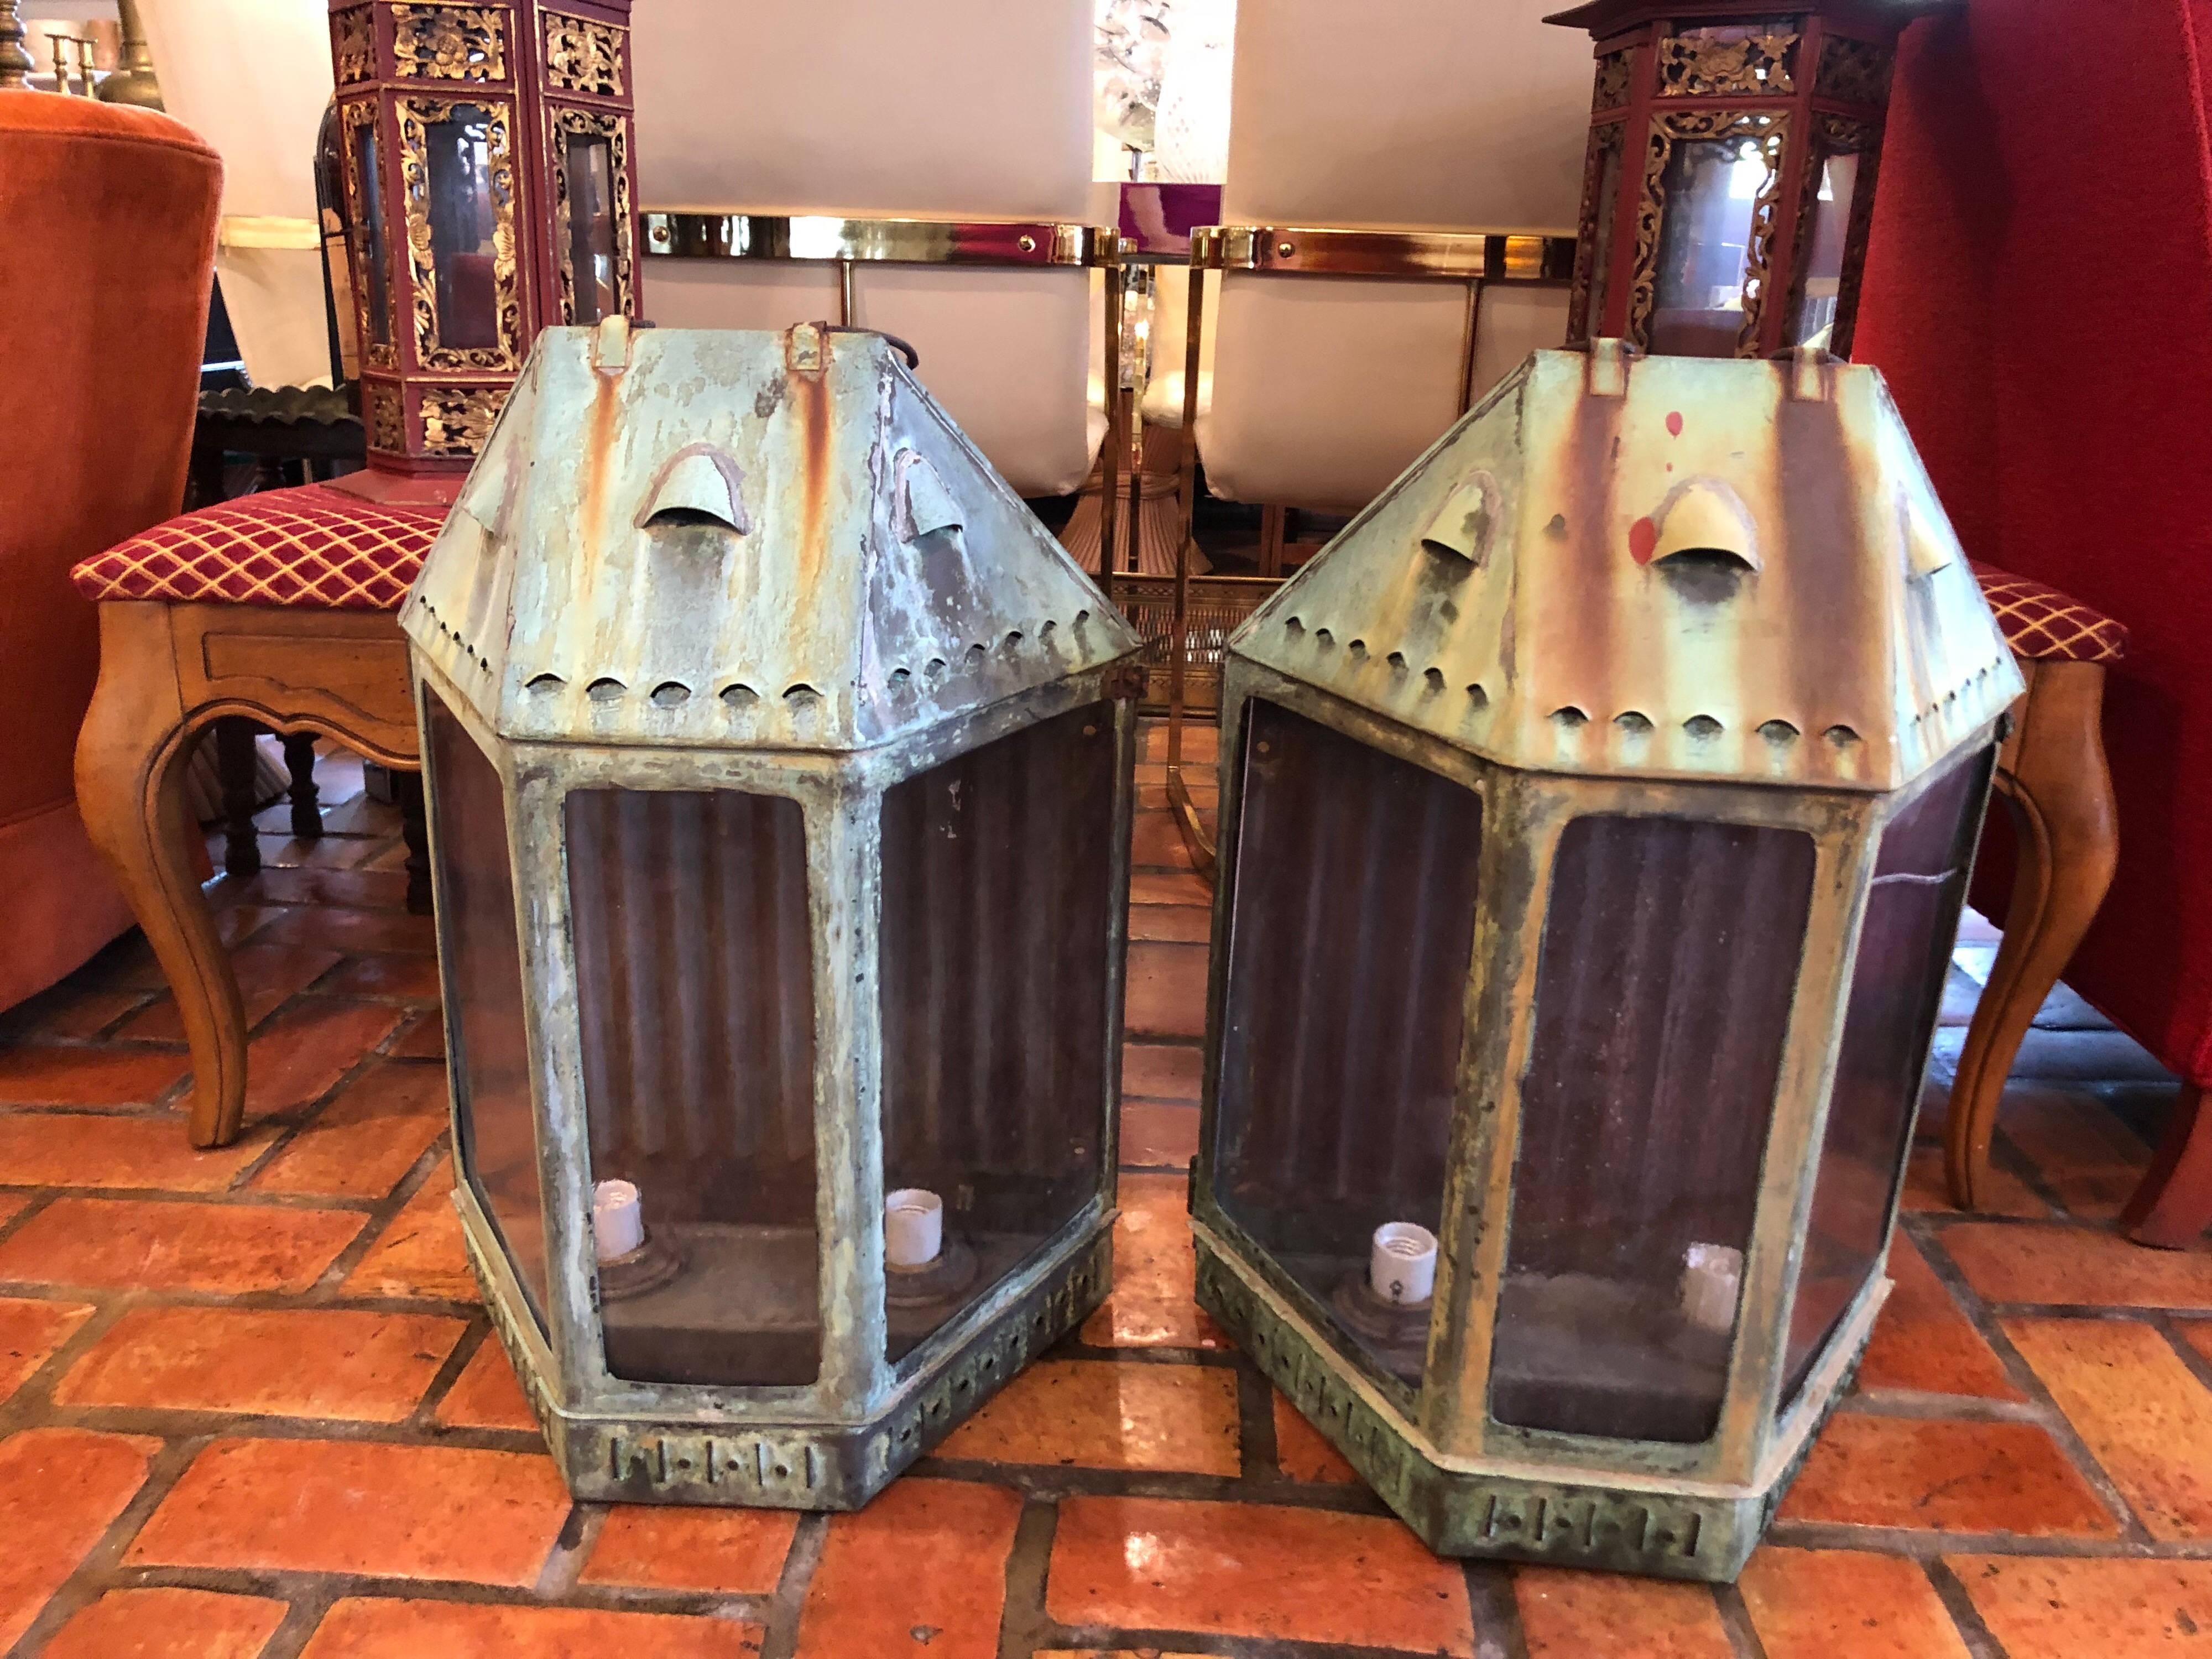 Pair of large antique copper lanterns. Wonderful aged verdigris patina. Heavy and substantial. Probably originally
gas lit but now electrified with two sockets per lantern. Original thick hand blown bubble glass. One panel of one lantern has a very